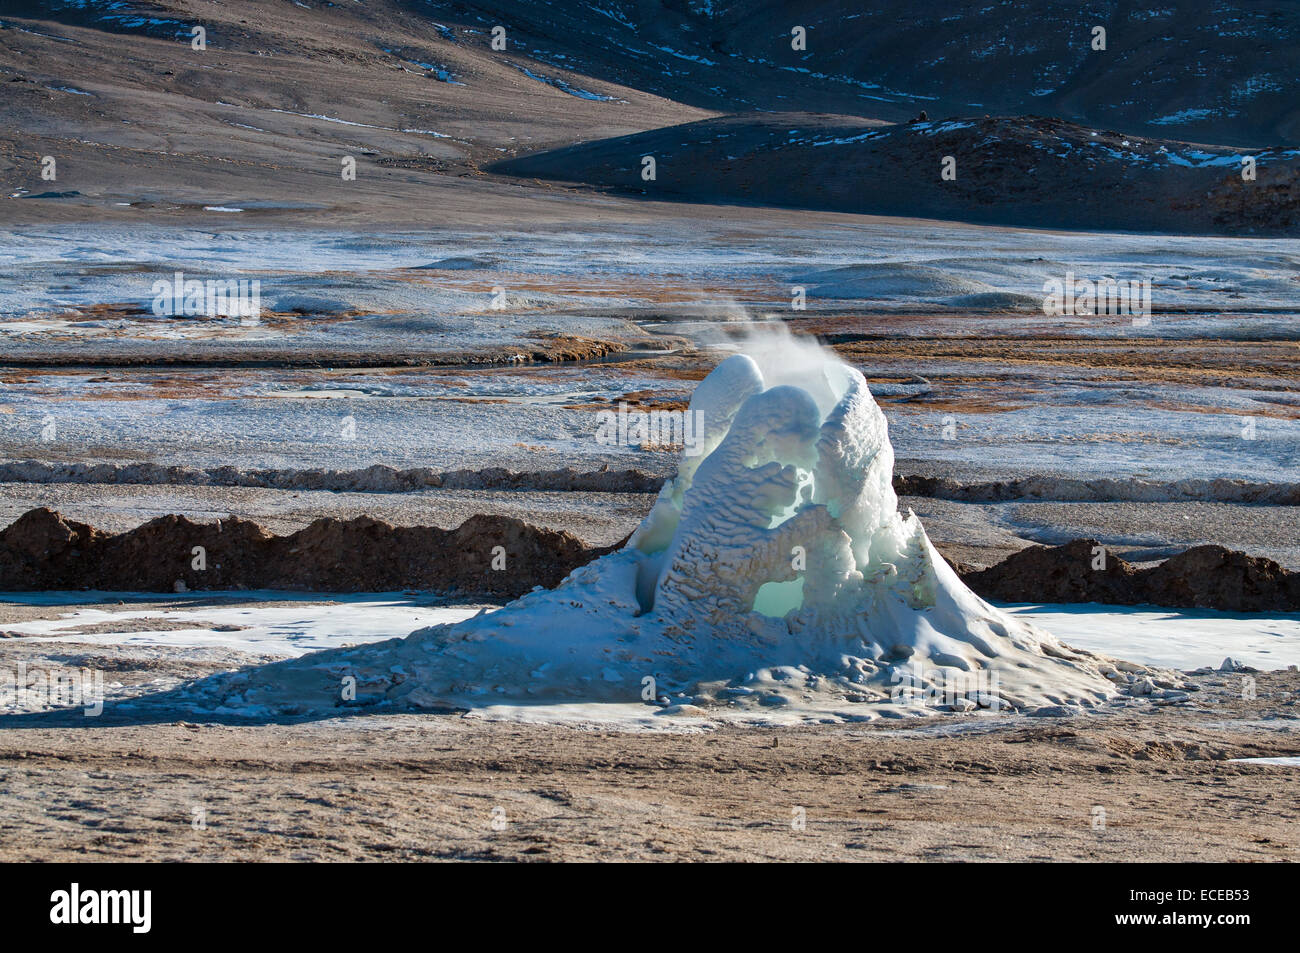 India, Jammu and Kashmir, Ladakh, Puga, Frozen Hot spring fountains in winter Stock Photo